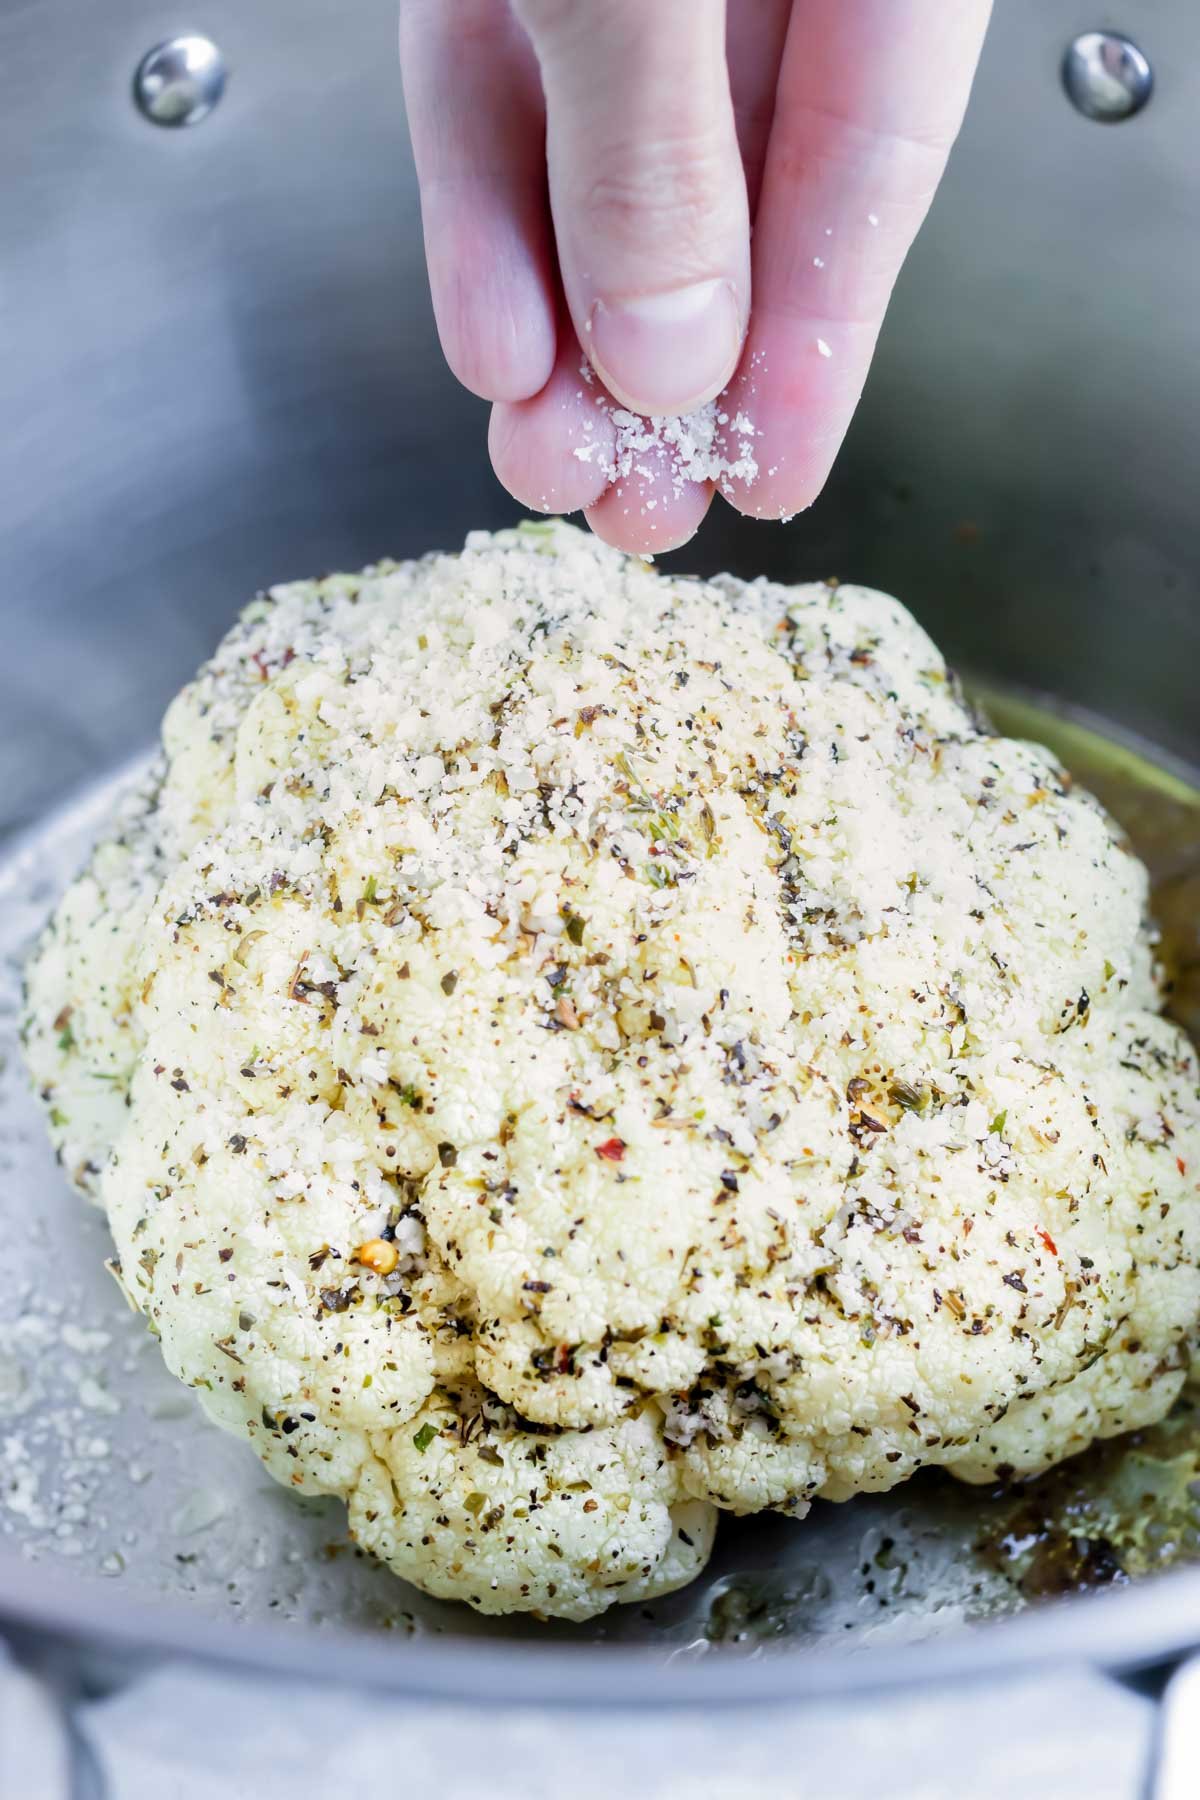 Sprinkle Parmesan cheese on top of the whole cauliflower head and finish roasting.